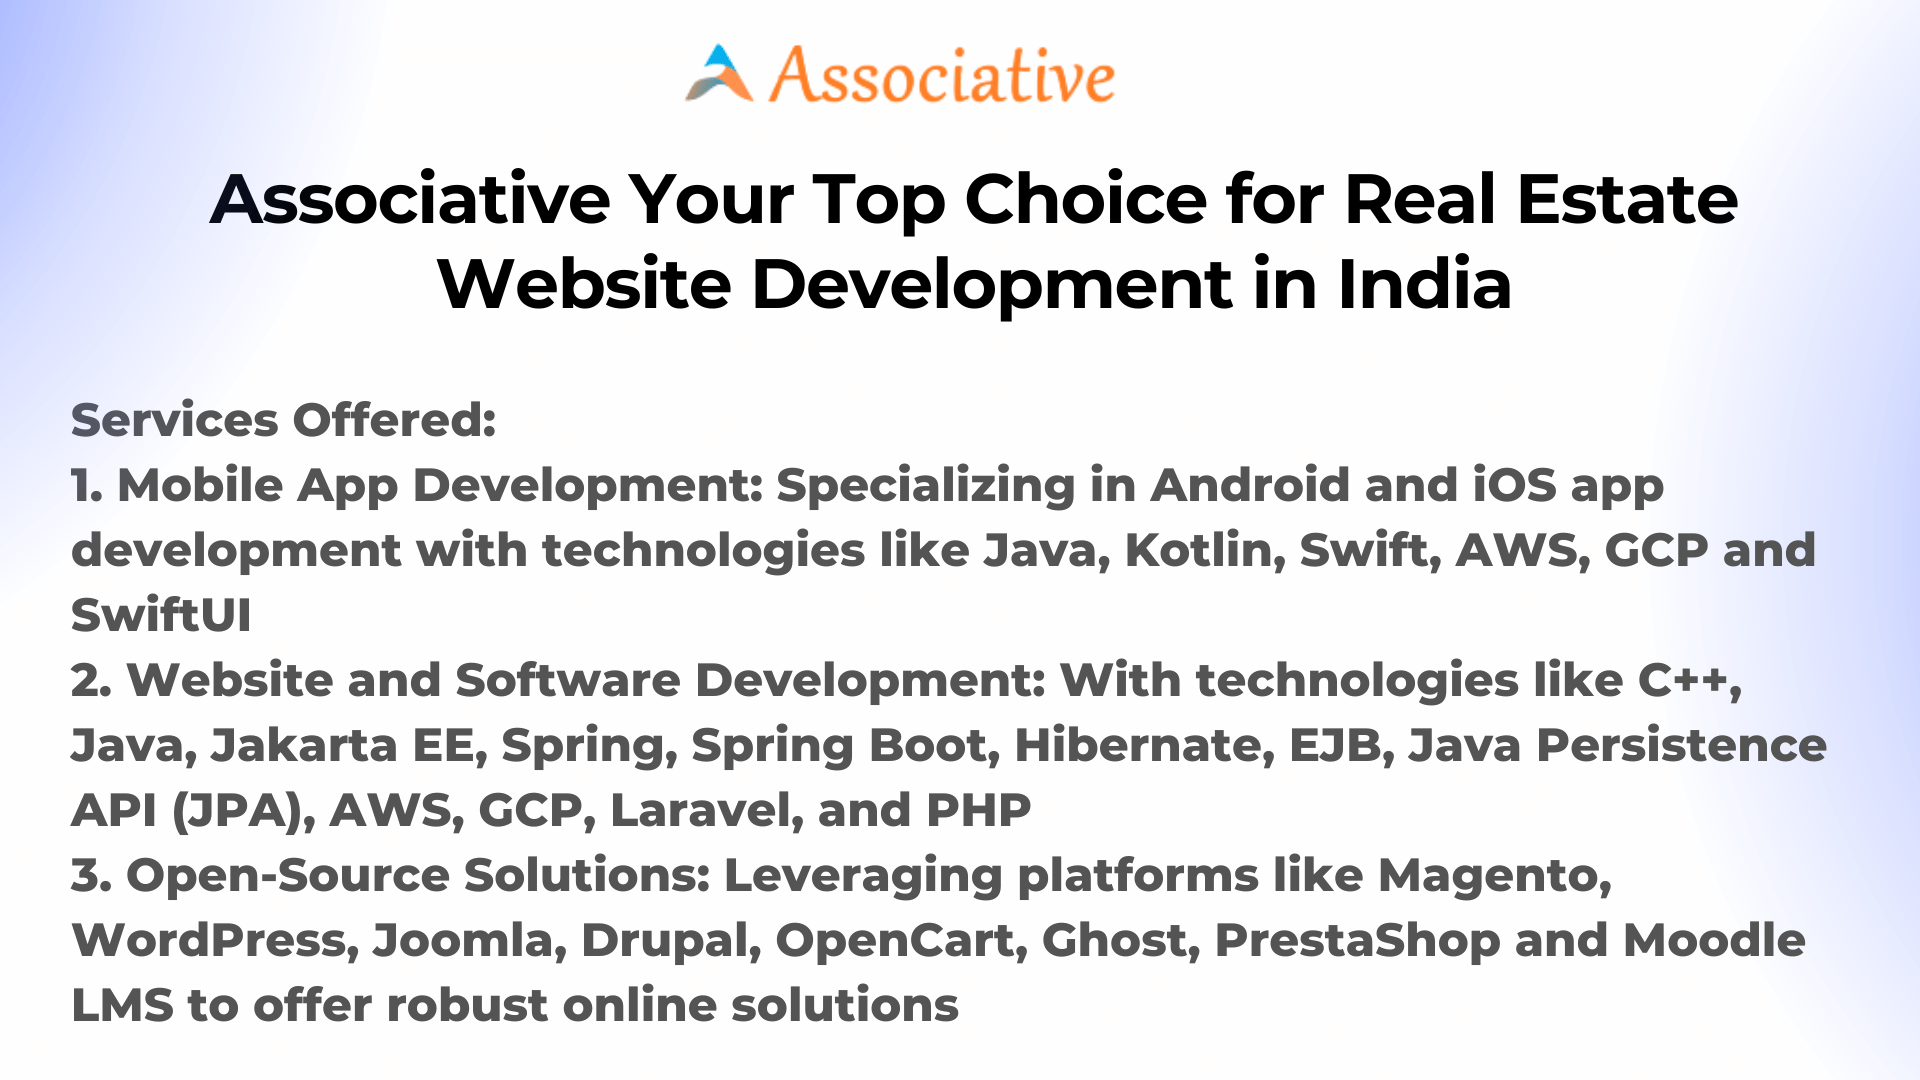 Associative Your Top Choice for Real Estate Website Development in India